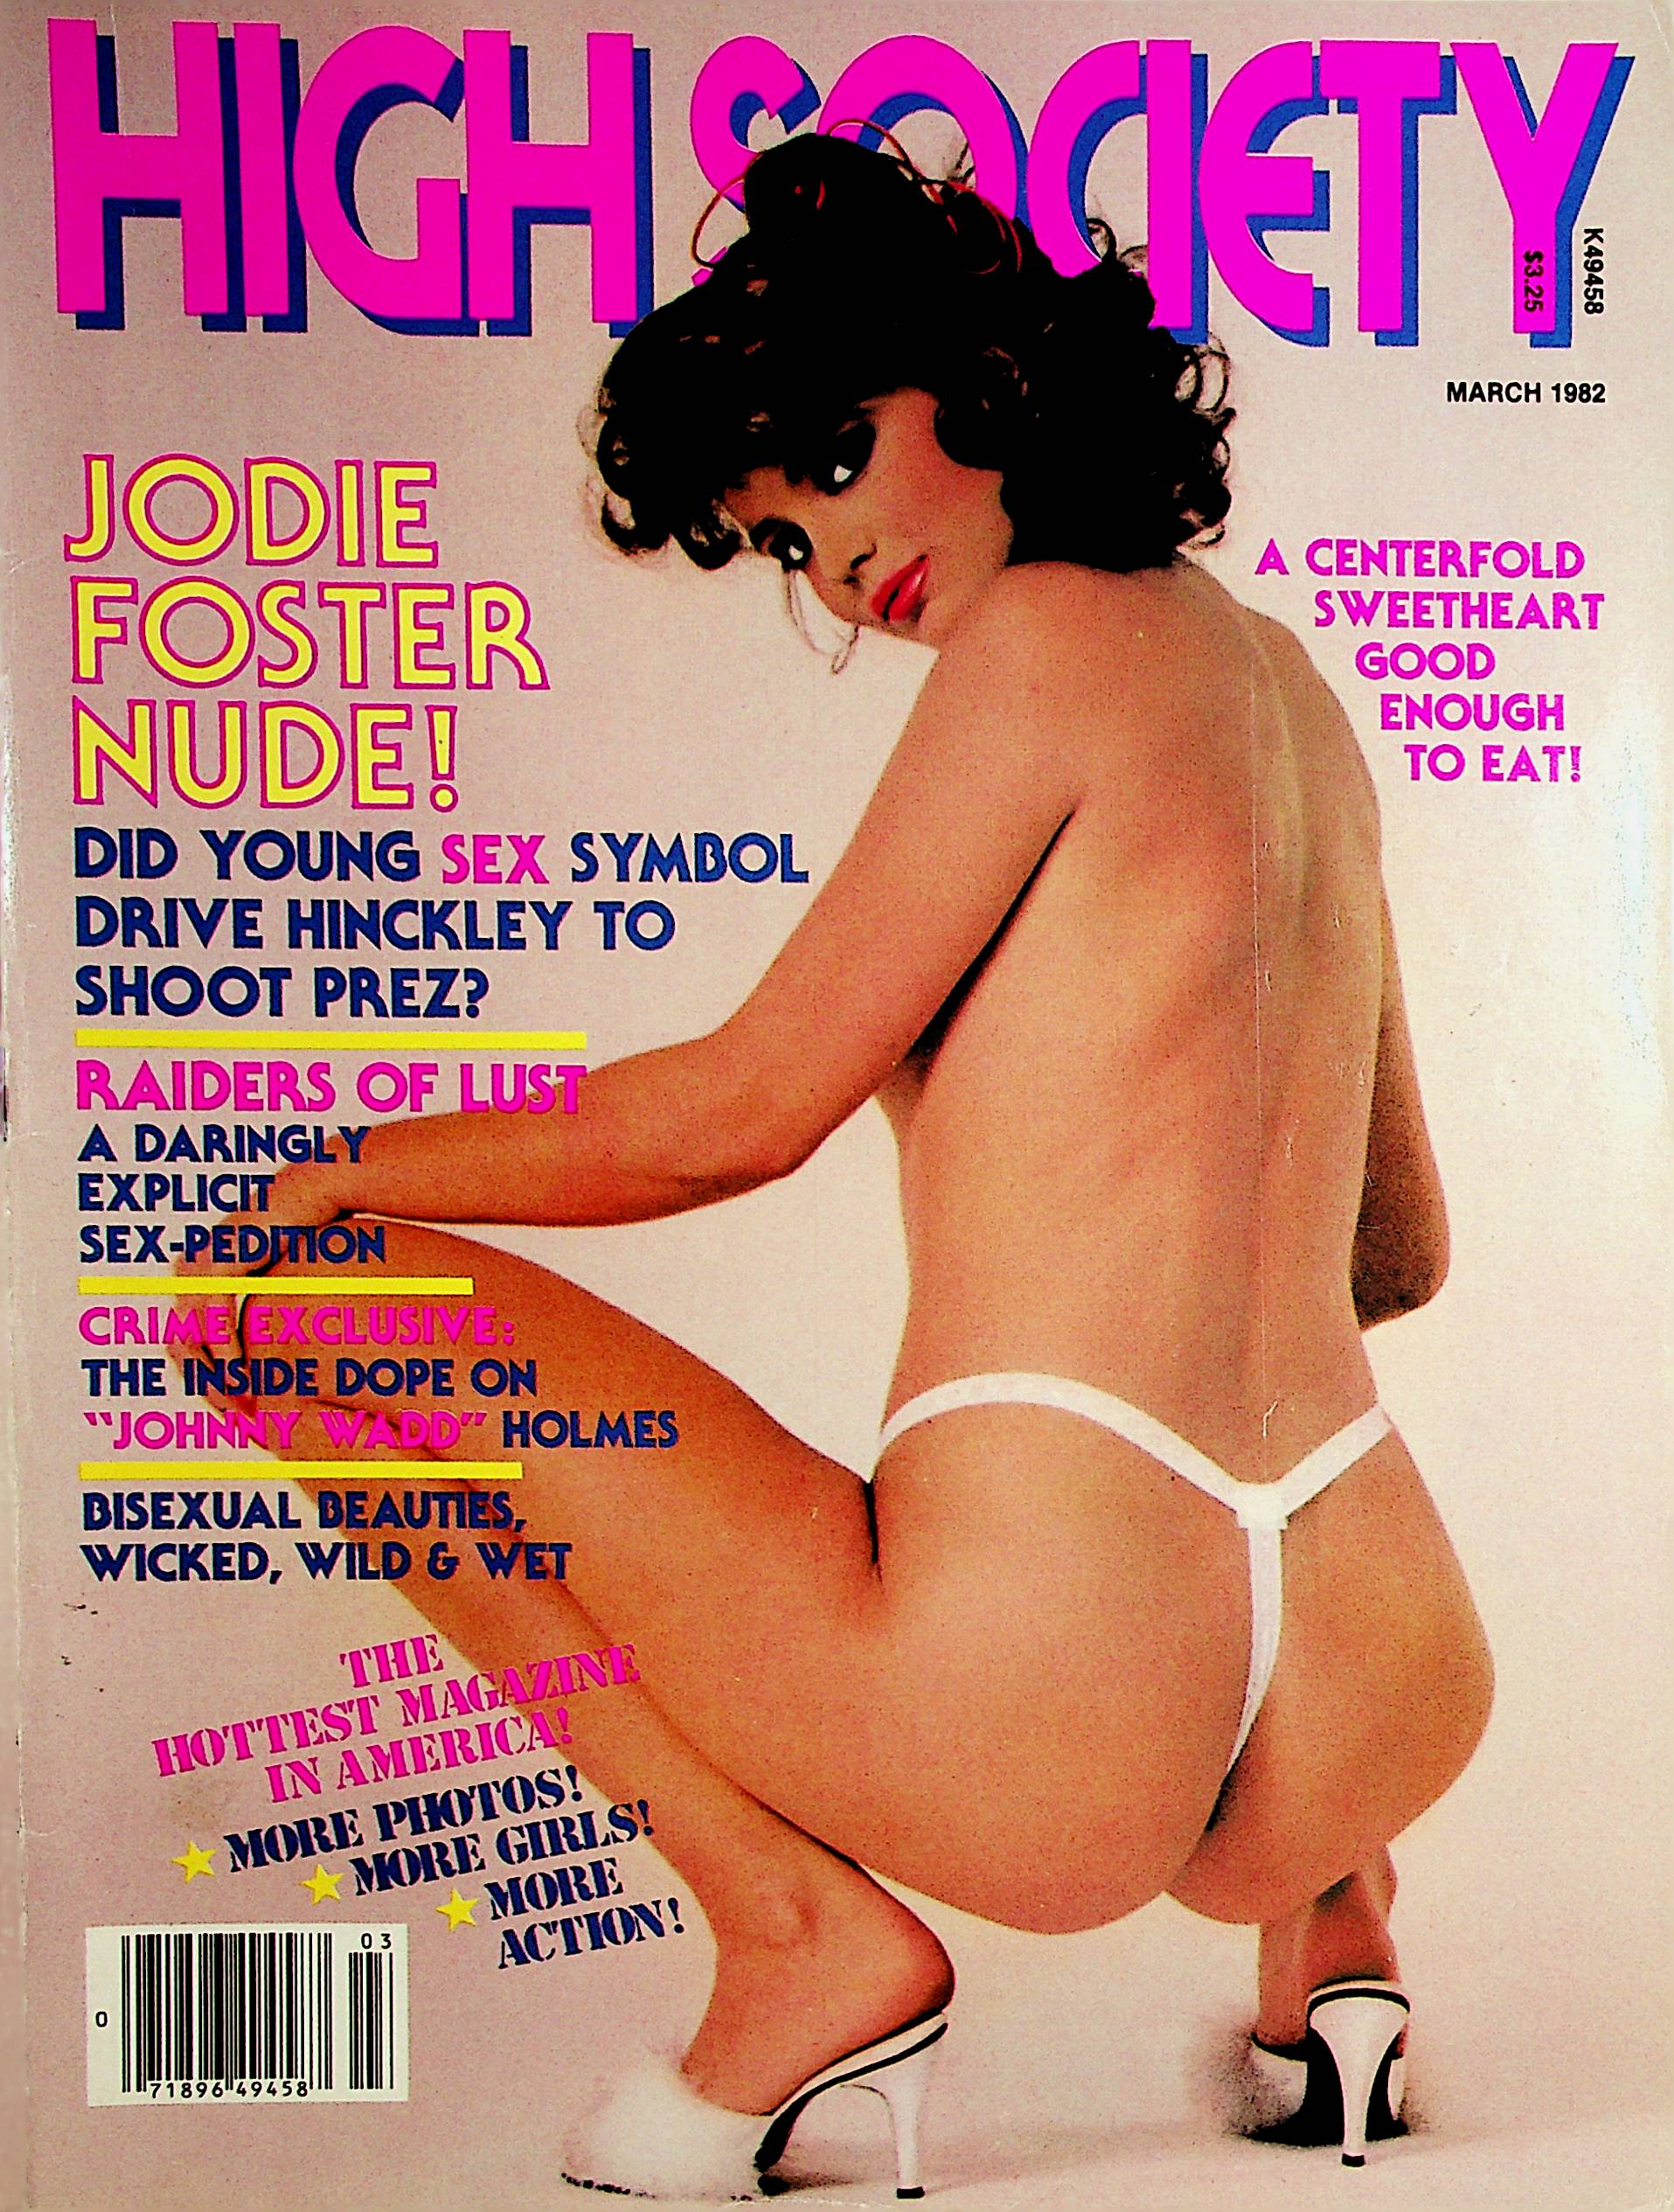 High Society Magazine Jodie Foster Nude / John Holmes March 1982 01152